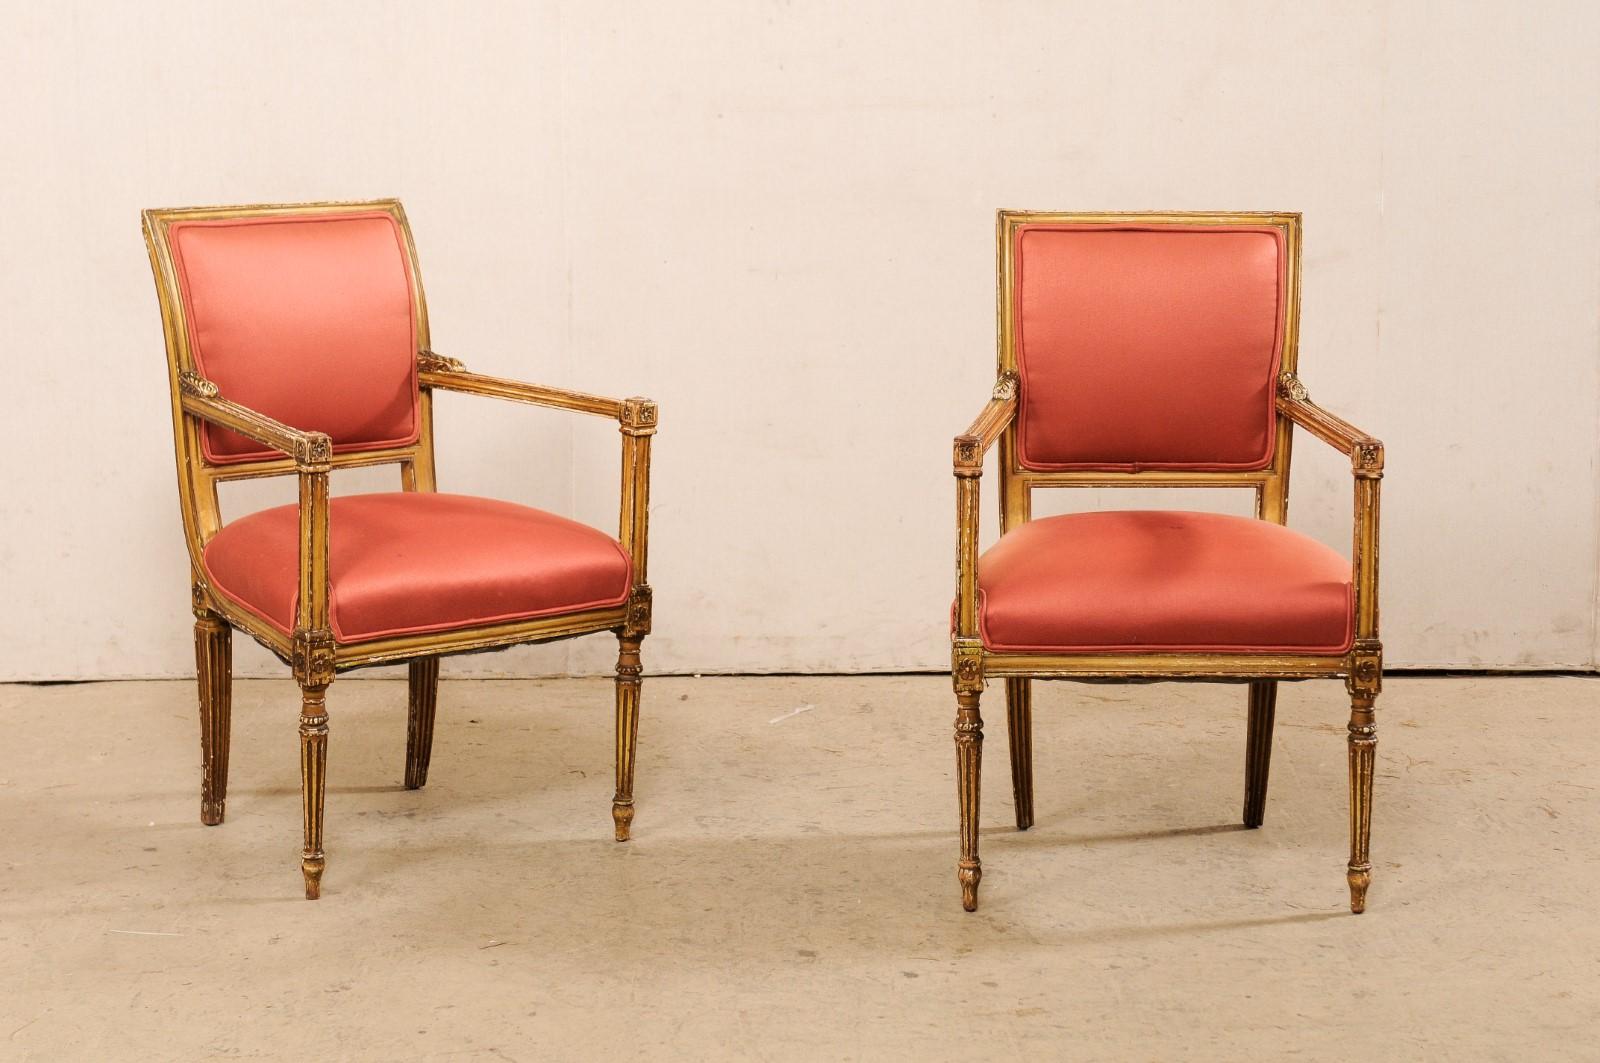 An Italian pair of Neoclassical style armchairs from the early 20th century. This antique pair of accent chairs from Italy are each carved with neoclassic stylings with clean/linear arms topped with acanthus leaves carved next to the back rest and